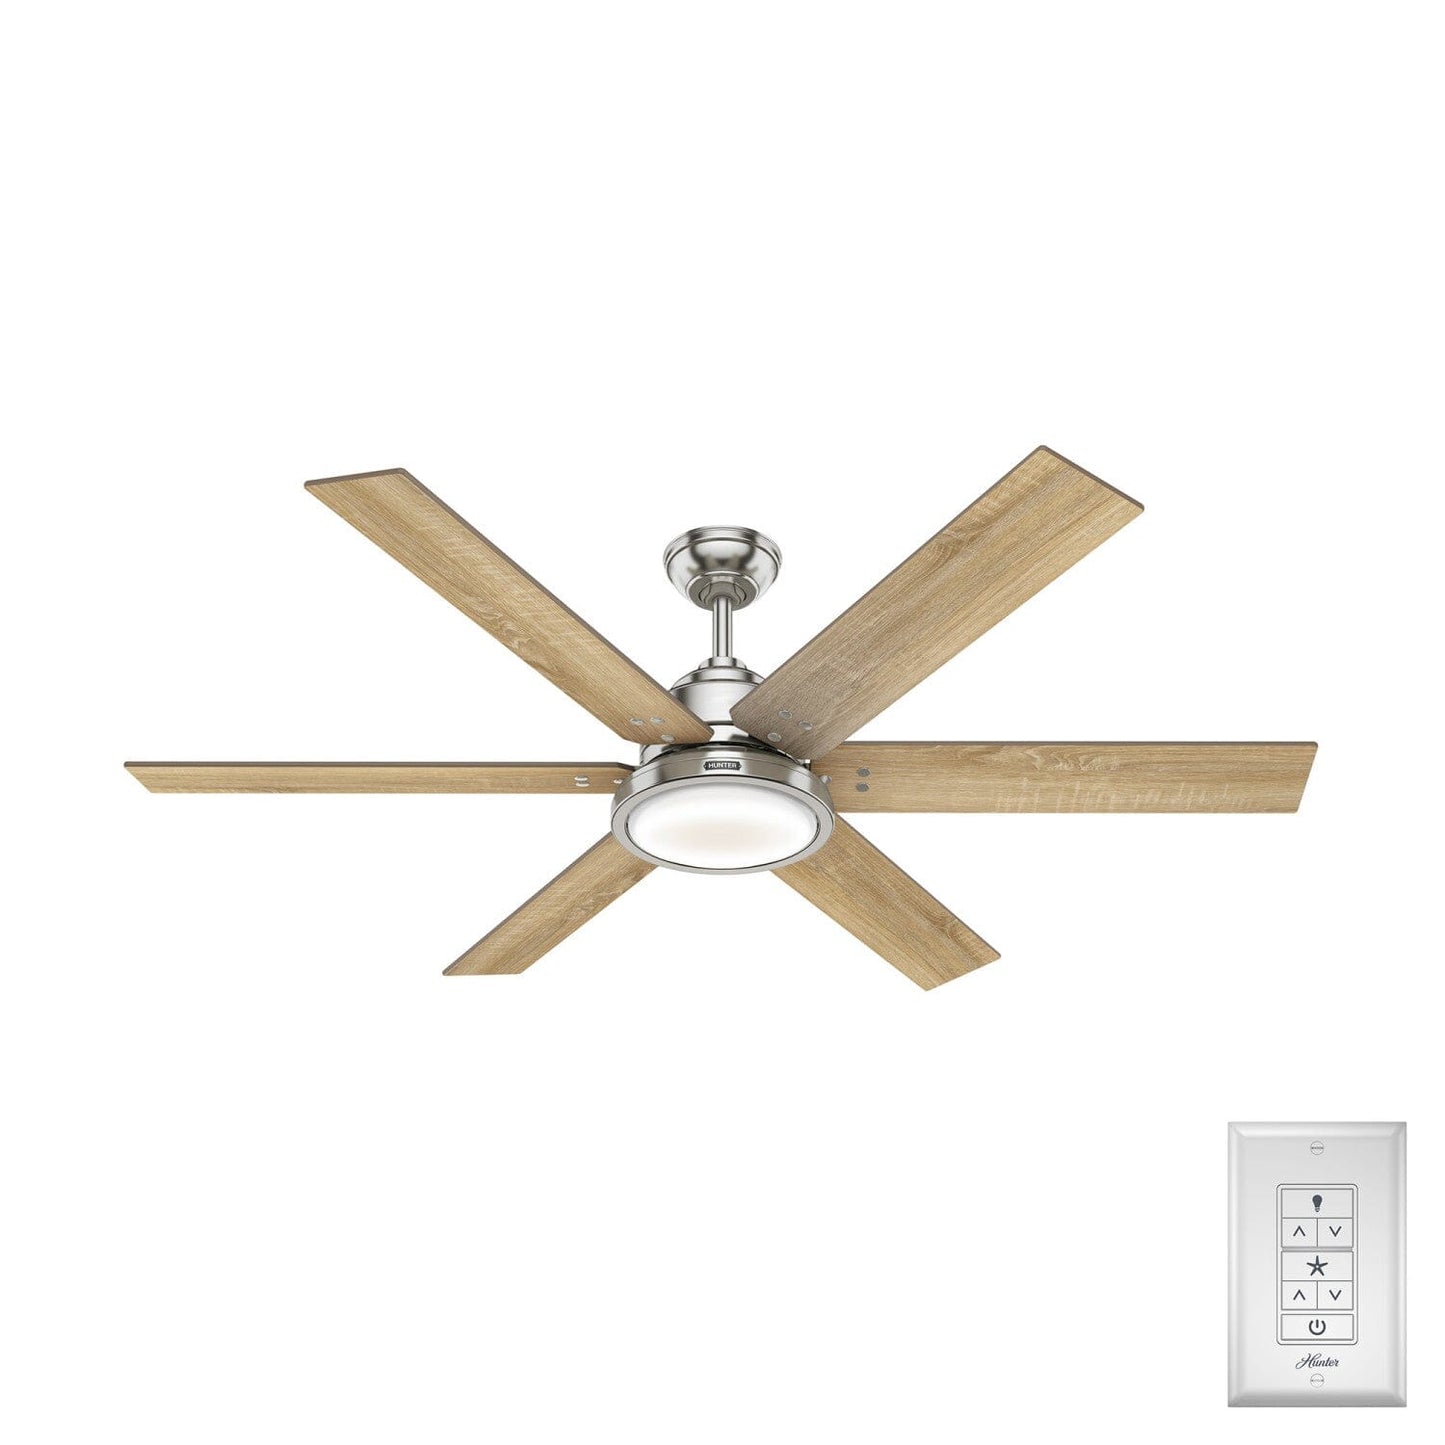 Warrant ENERGY STAR with Light 60 inch Ceiling Fans Hunter Brushed Nickel - Drifted Oak 